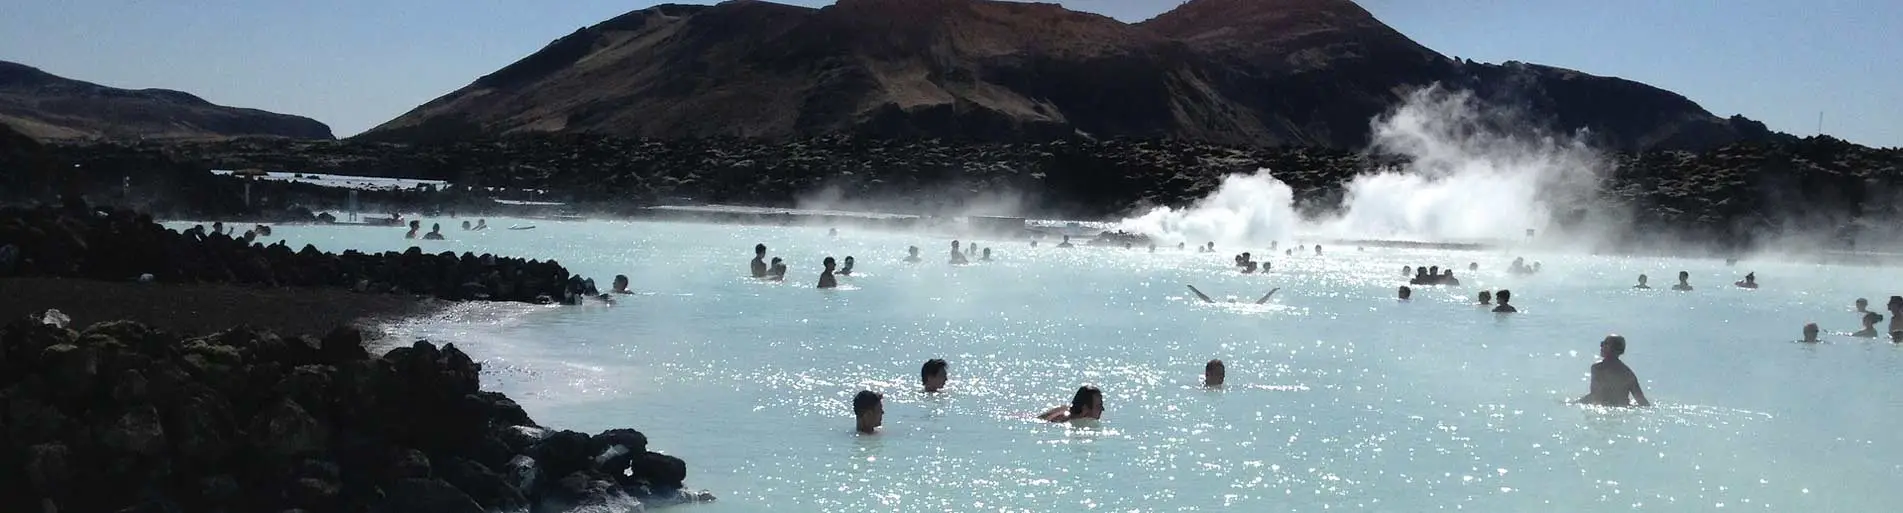 Blue Lagoon Iceland: Discovering This One-of-a-Kind Wonder